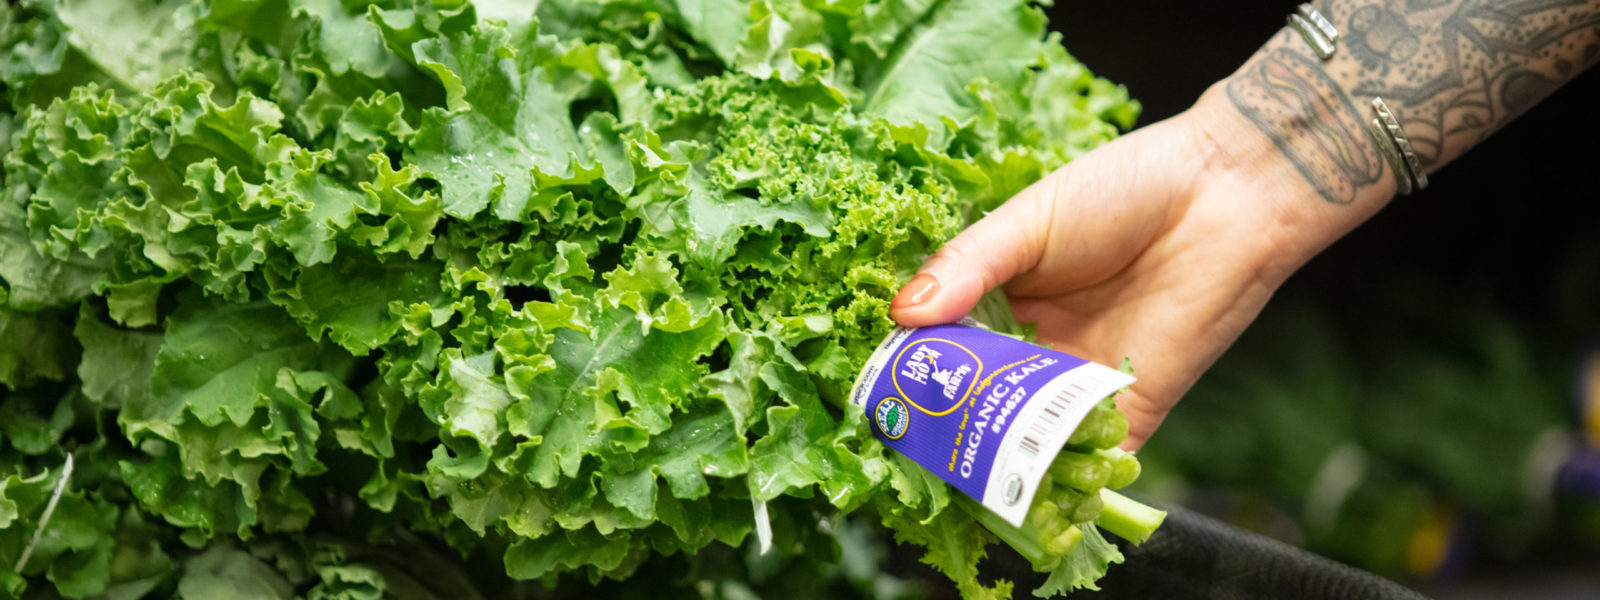 A photo of a hand taking a bunch of green kale wrapped in a purple label